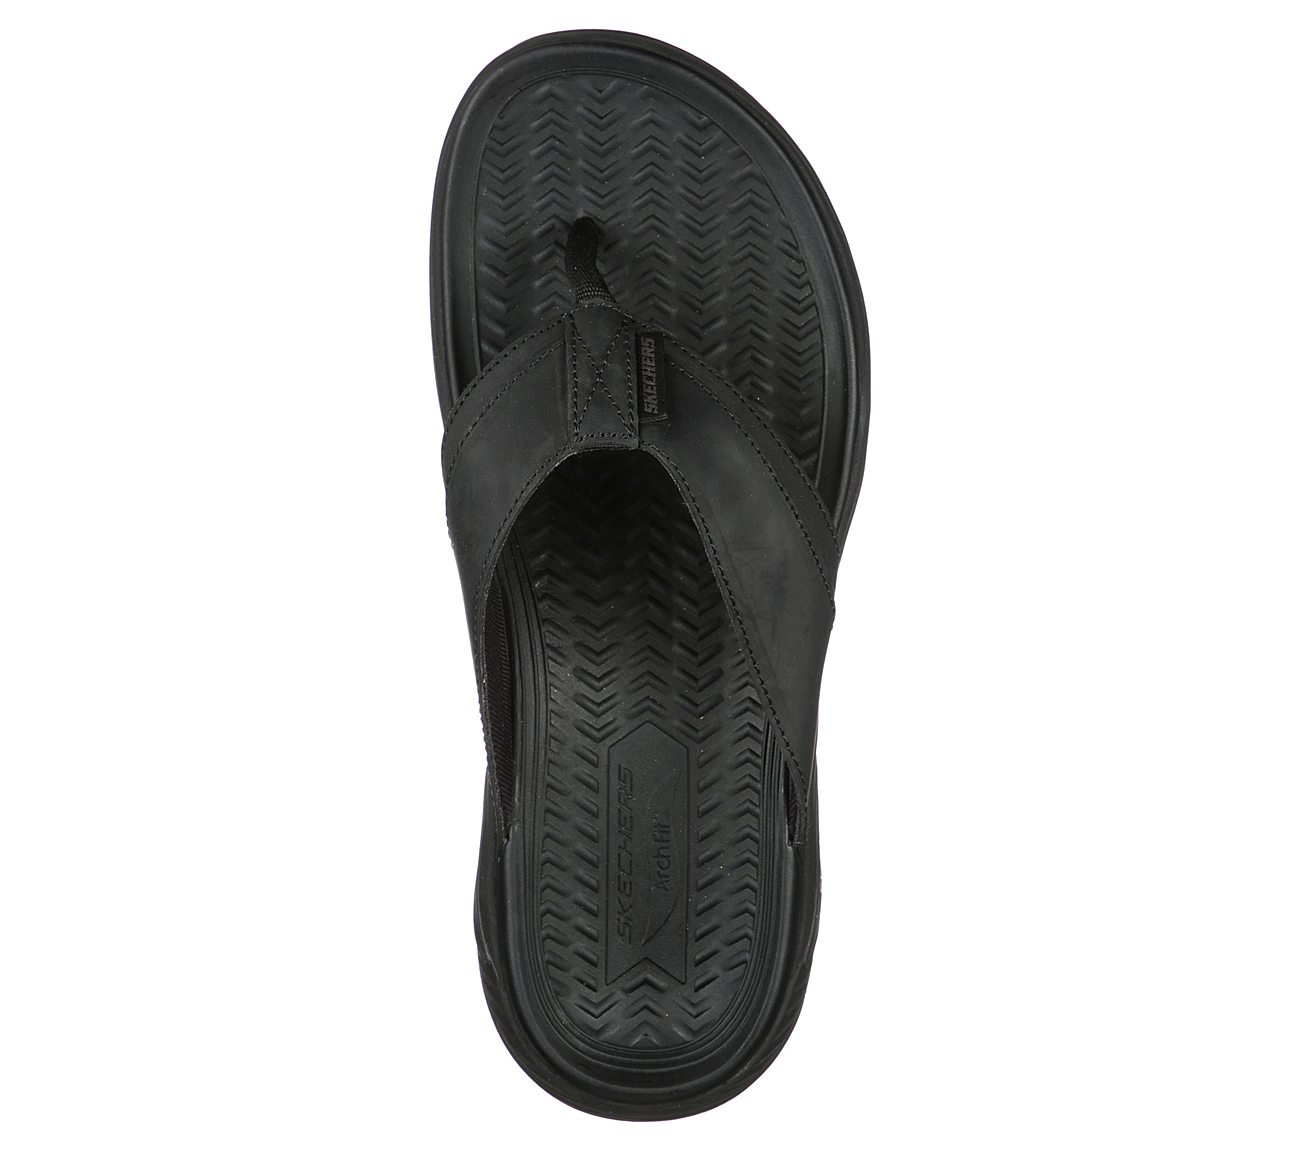 ARCH FIT MOTLEY SD - MALICO, BBBBLACK Footwear Top View